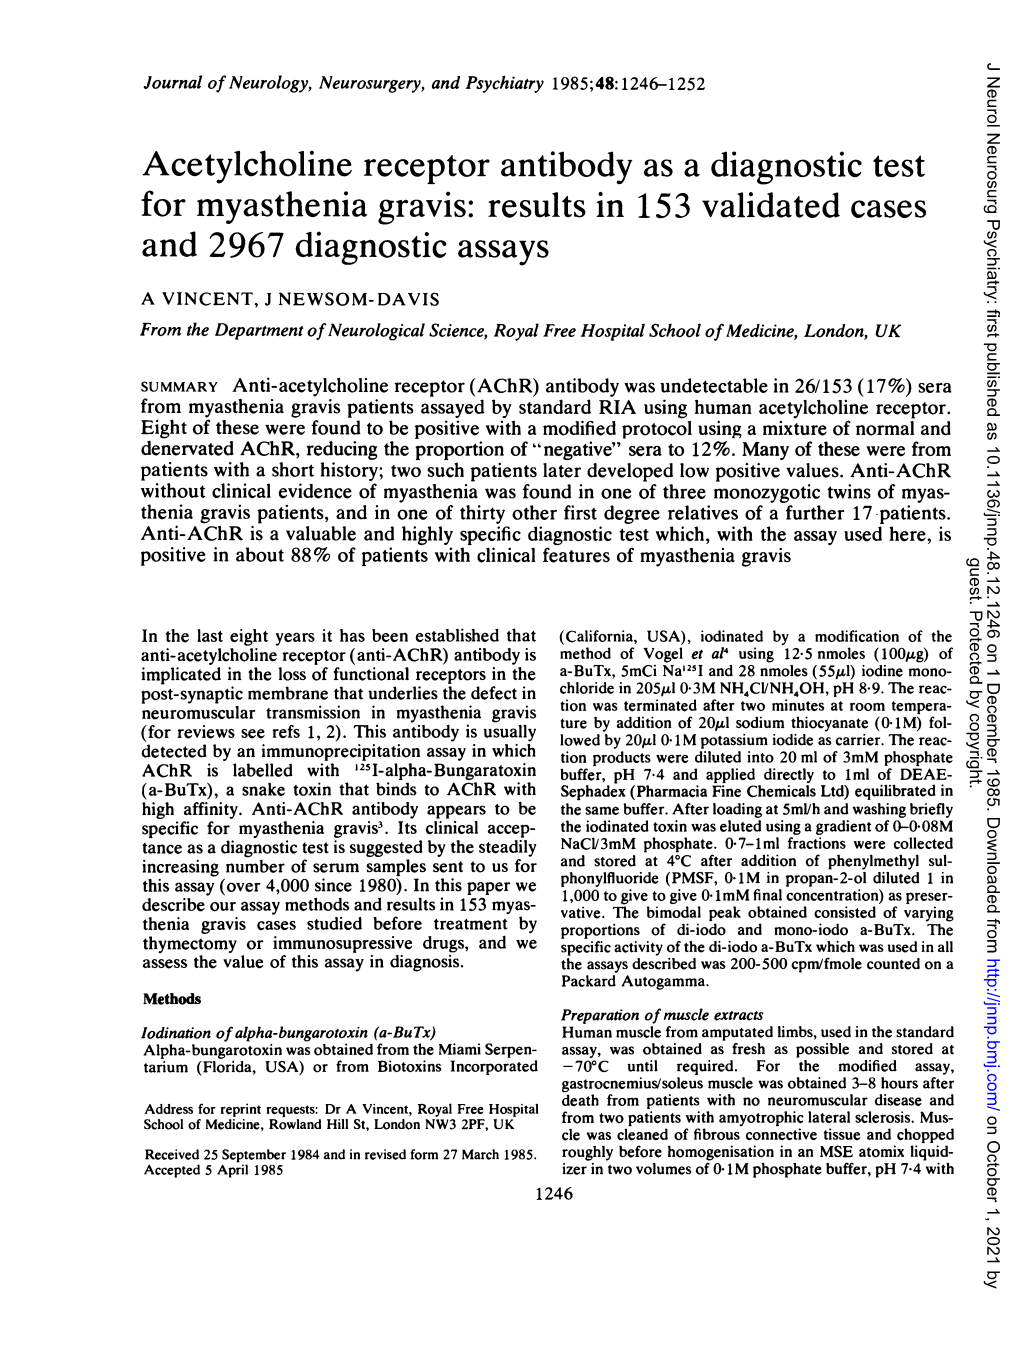 Acetylcholine Receptor Antibody As a Diagnostic Test for Myasthenia Gravis: Results in 153 Validated Cases and 2967 Diagnostic Assays